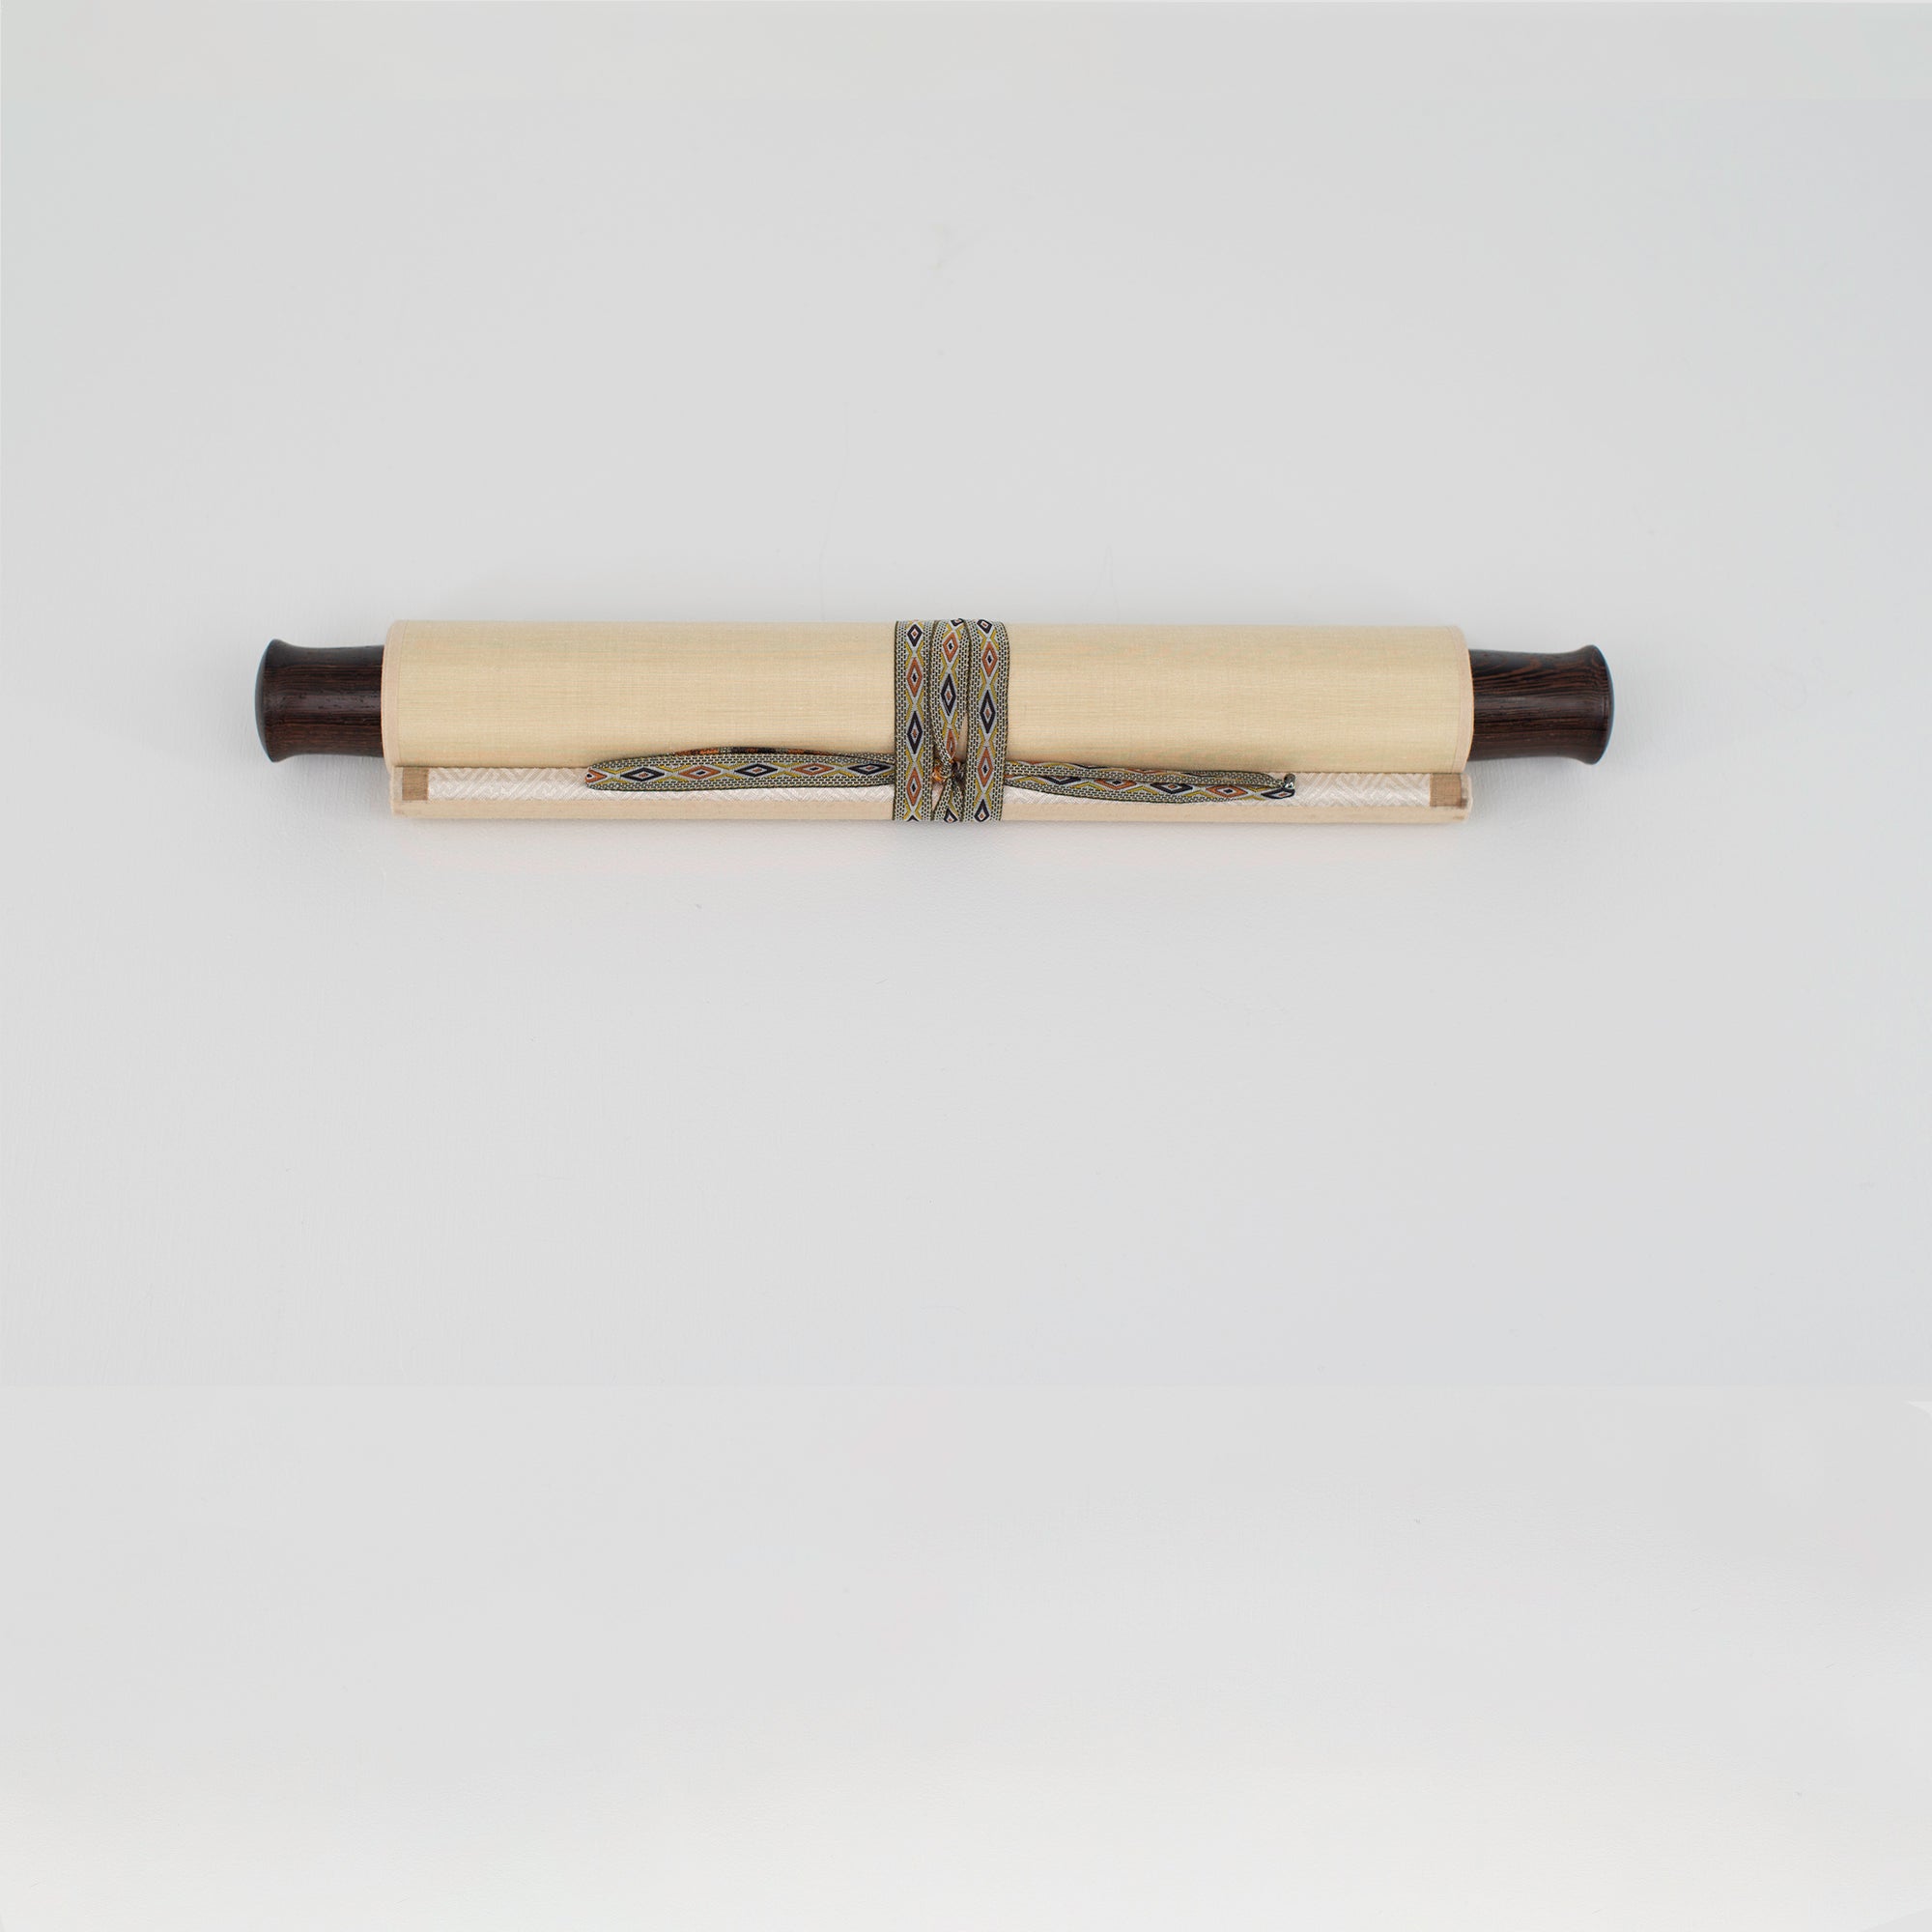 Peace and Prosperity - Hanging Scroll